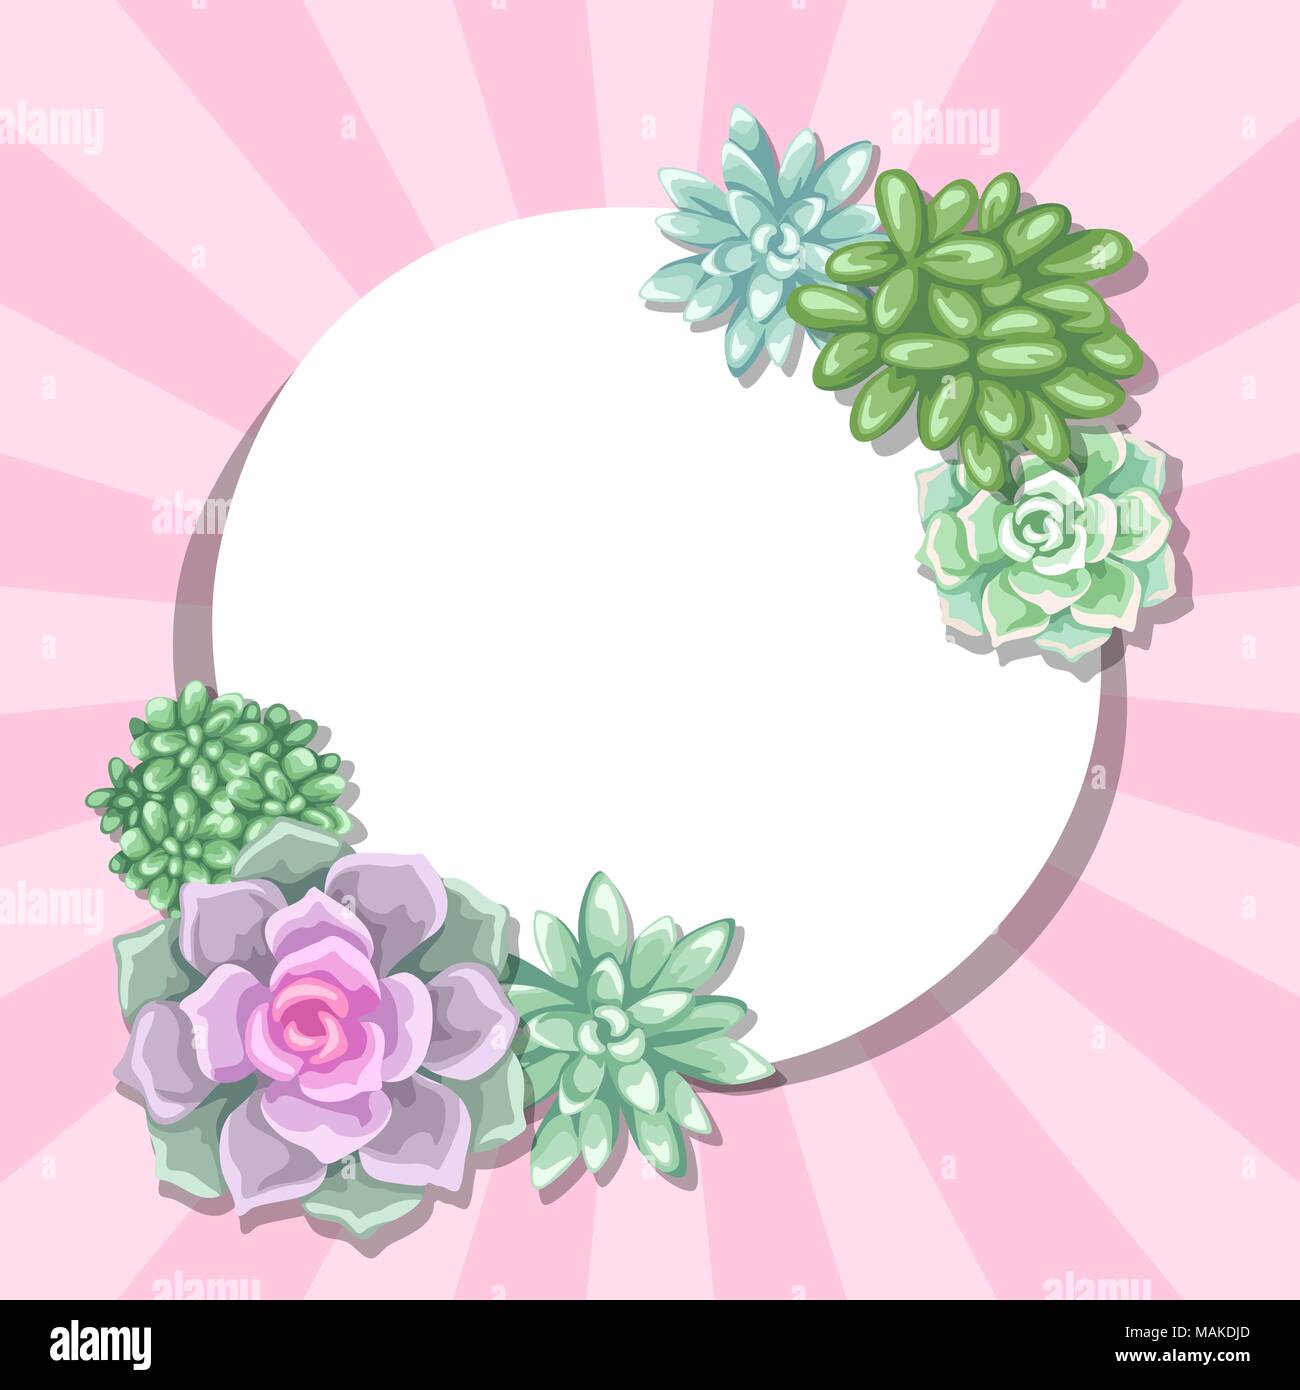 Card with succulents. Echeveria, Jade Plant and Donkey Tails Stock Vector